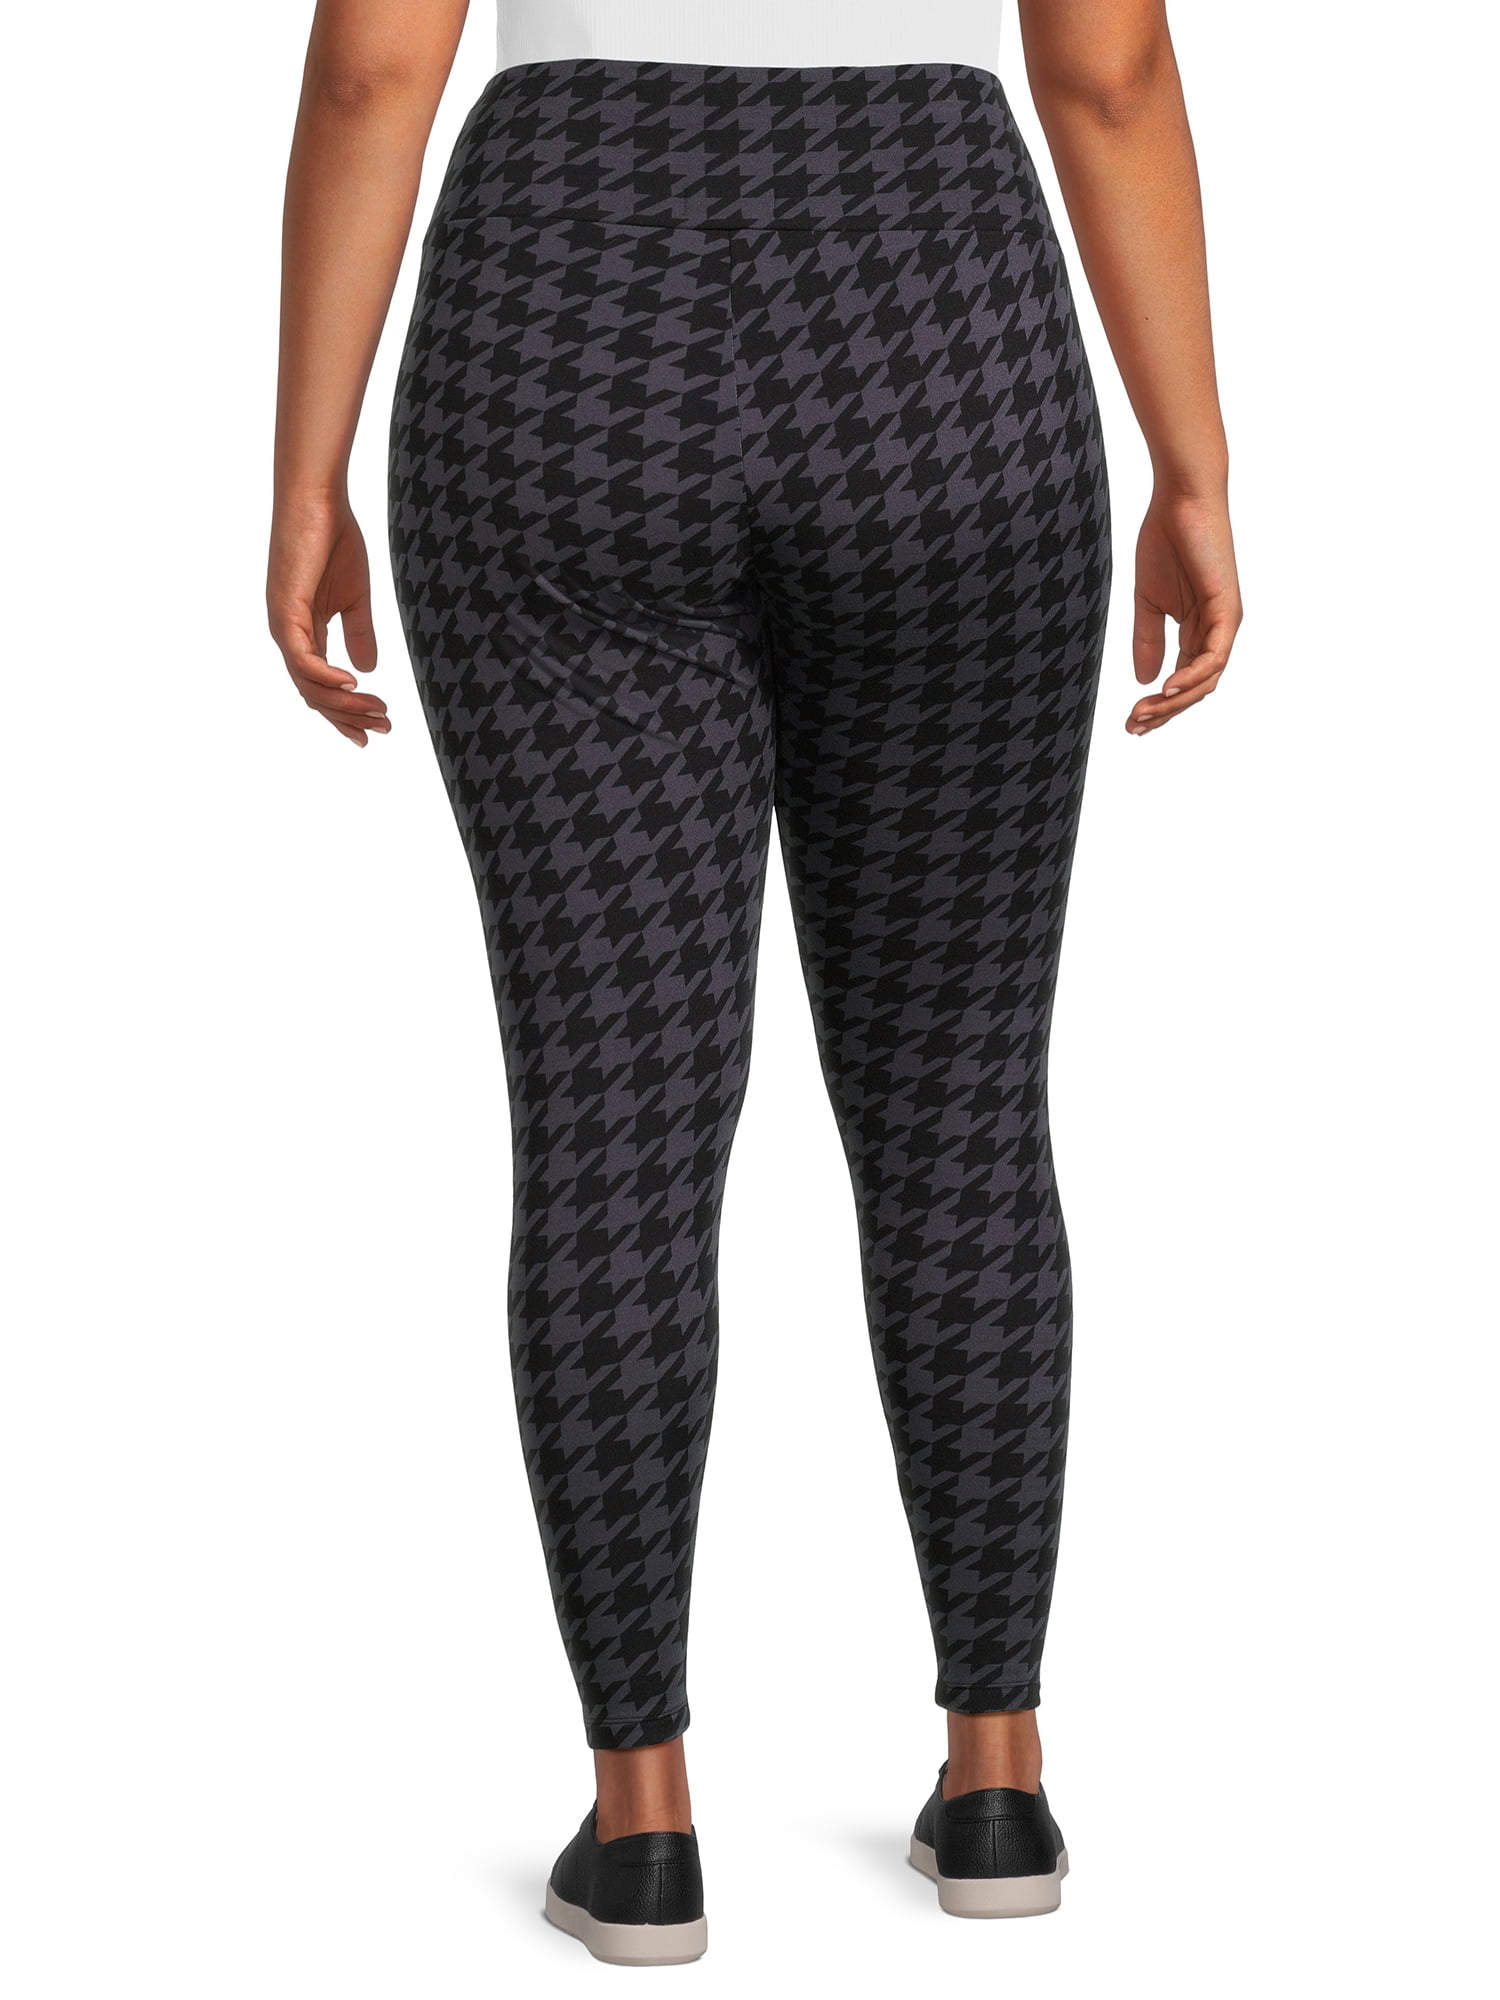 All-Over Print Plus Size Leggings Duck Feathers